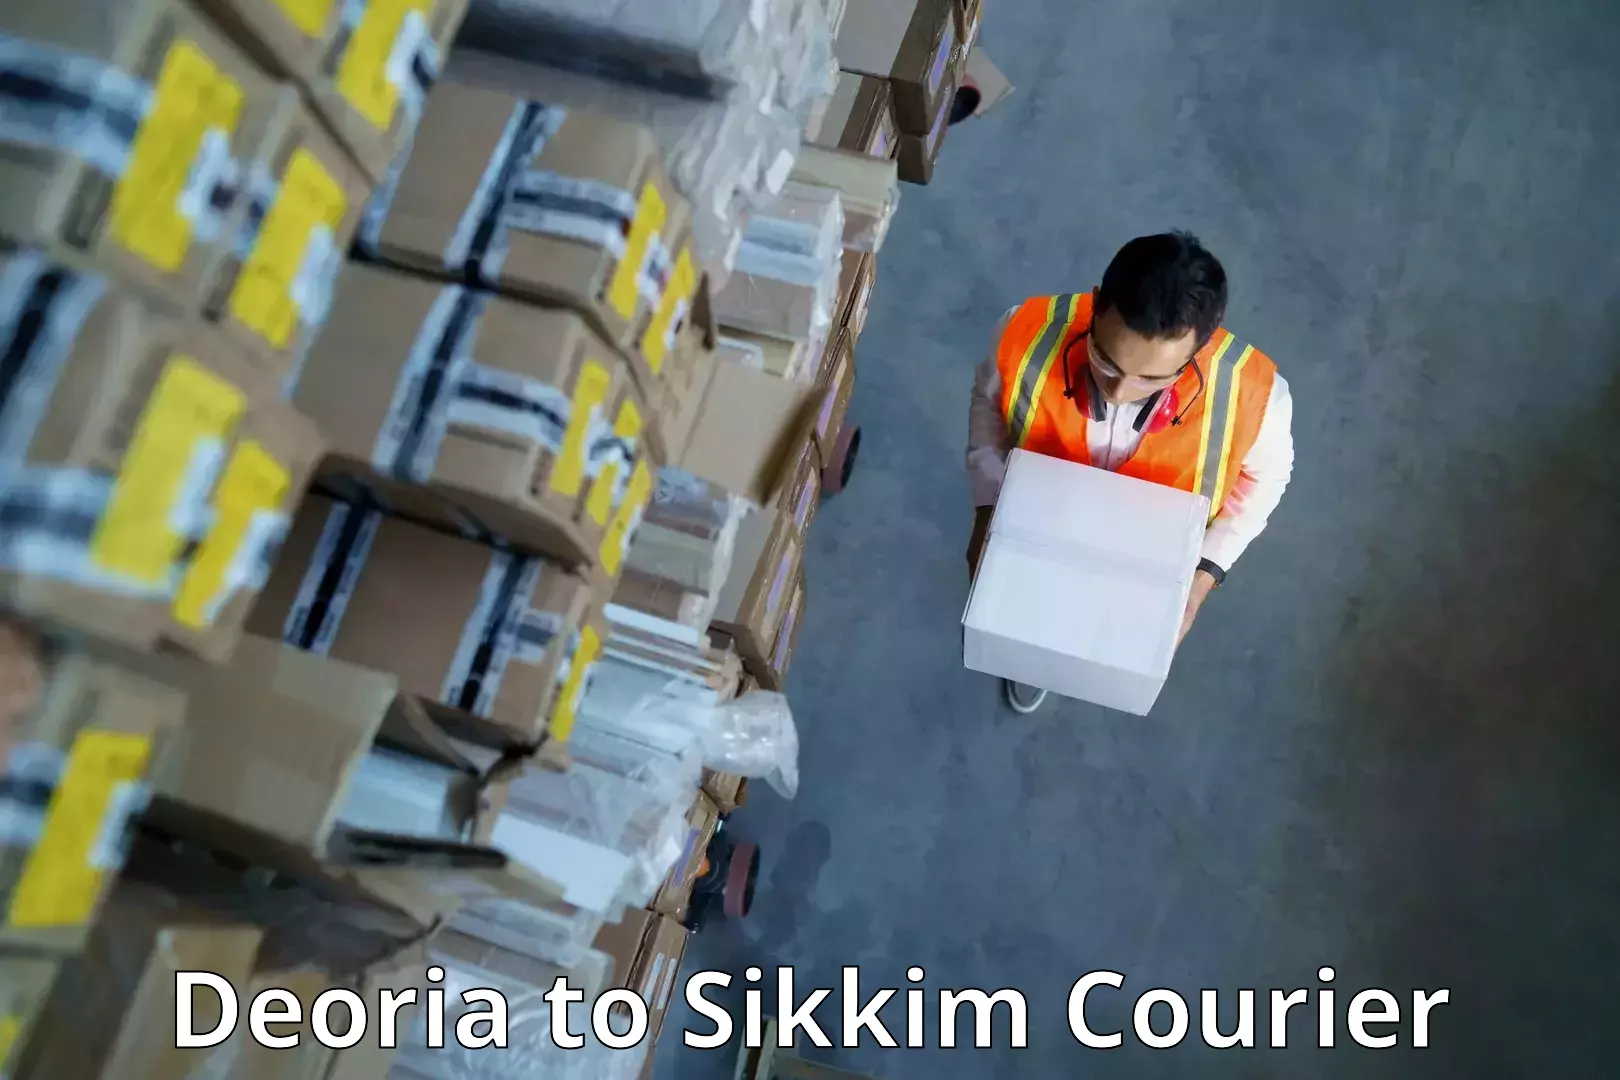 Subscription-based courier Deoria to East Sikkim